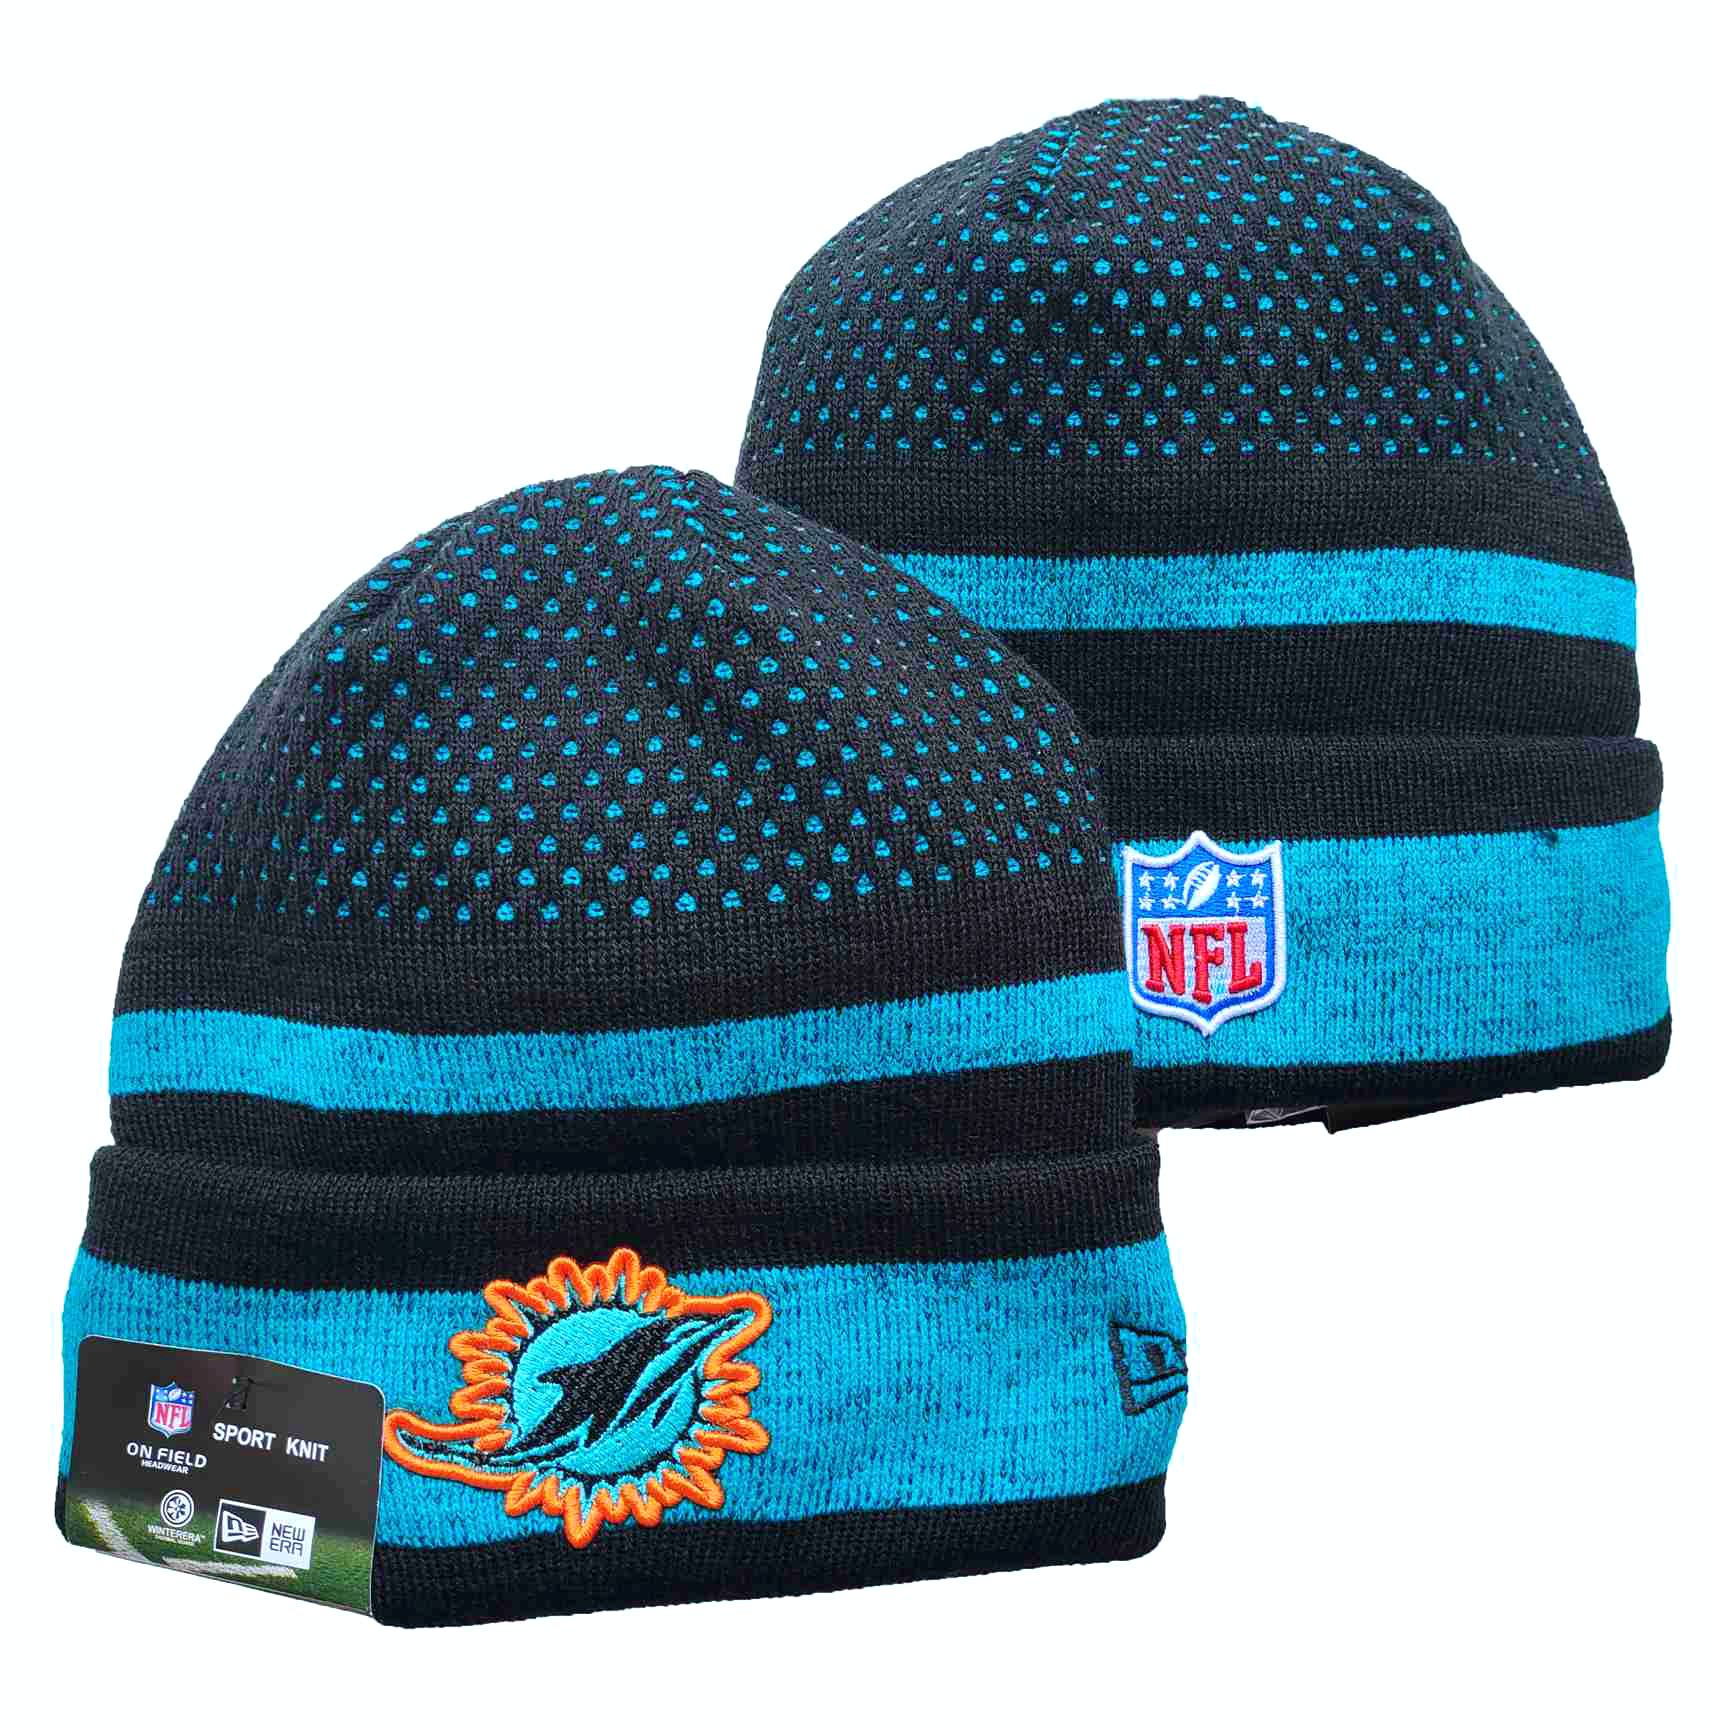 NFL Miami Dolphins Beanies Knit Hats-YD1028